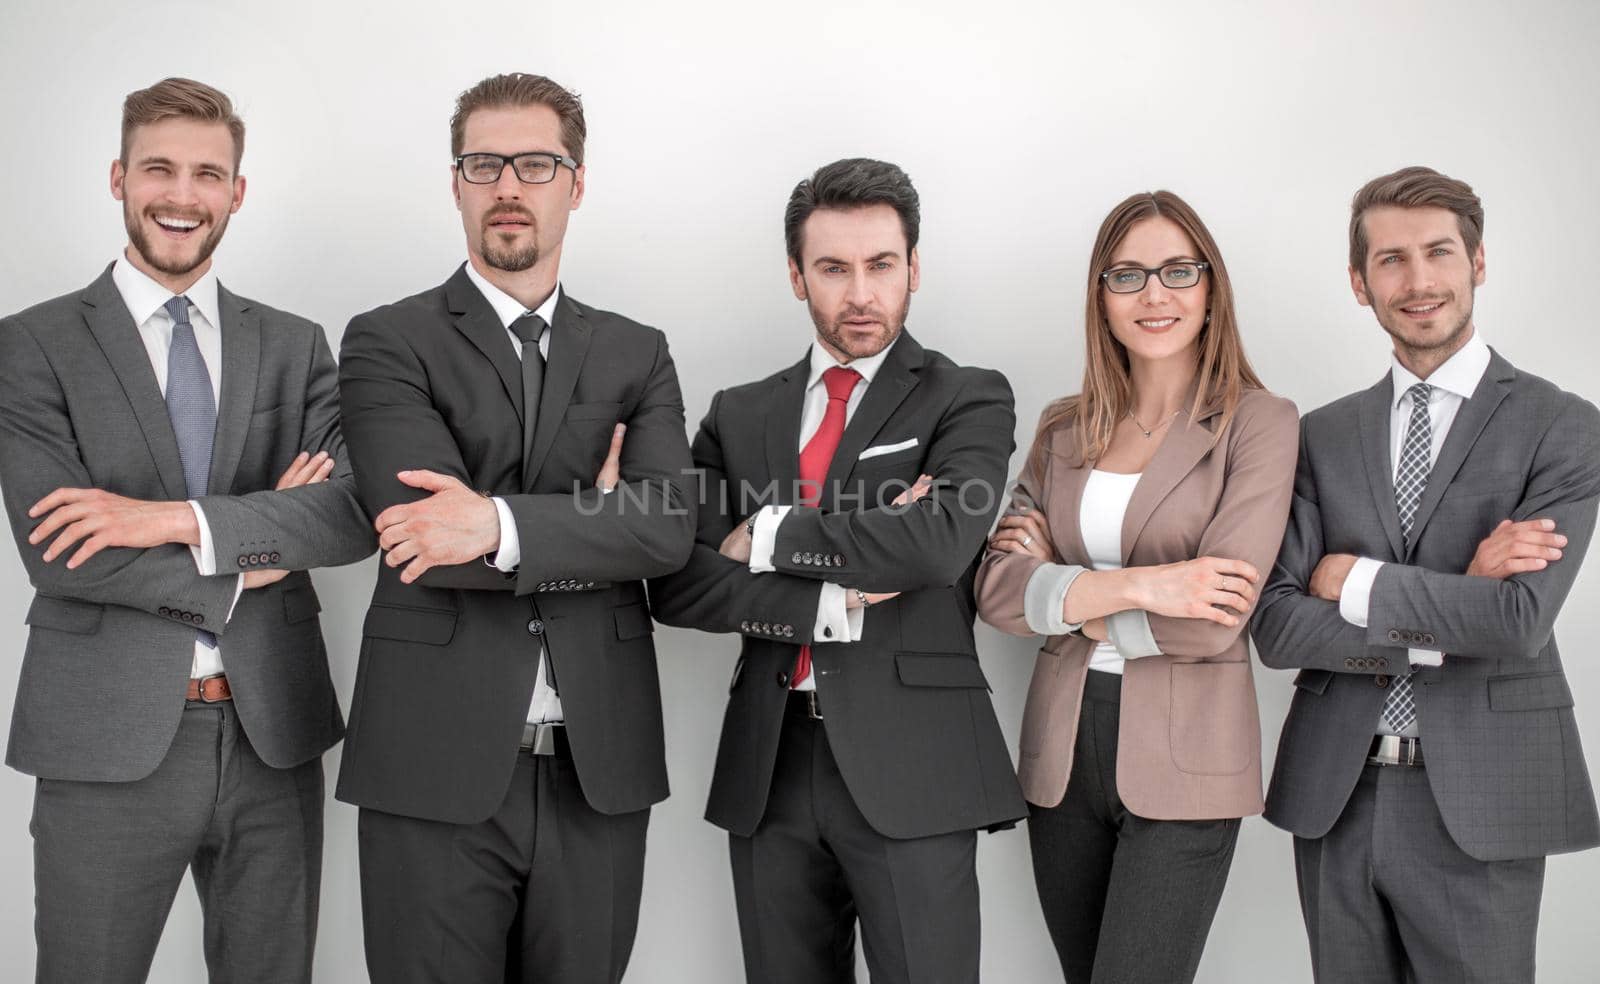 group of successful business people. isolated on light background